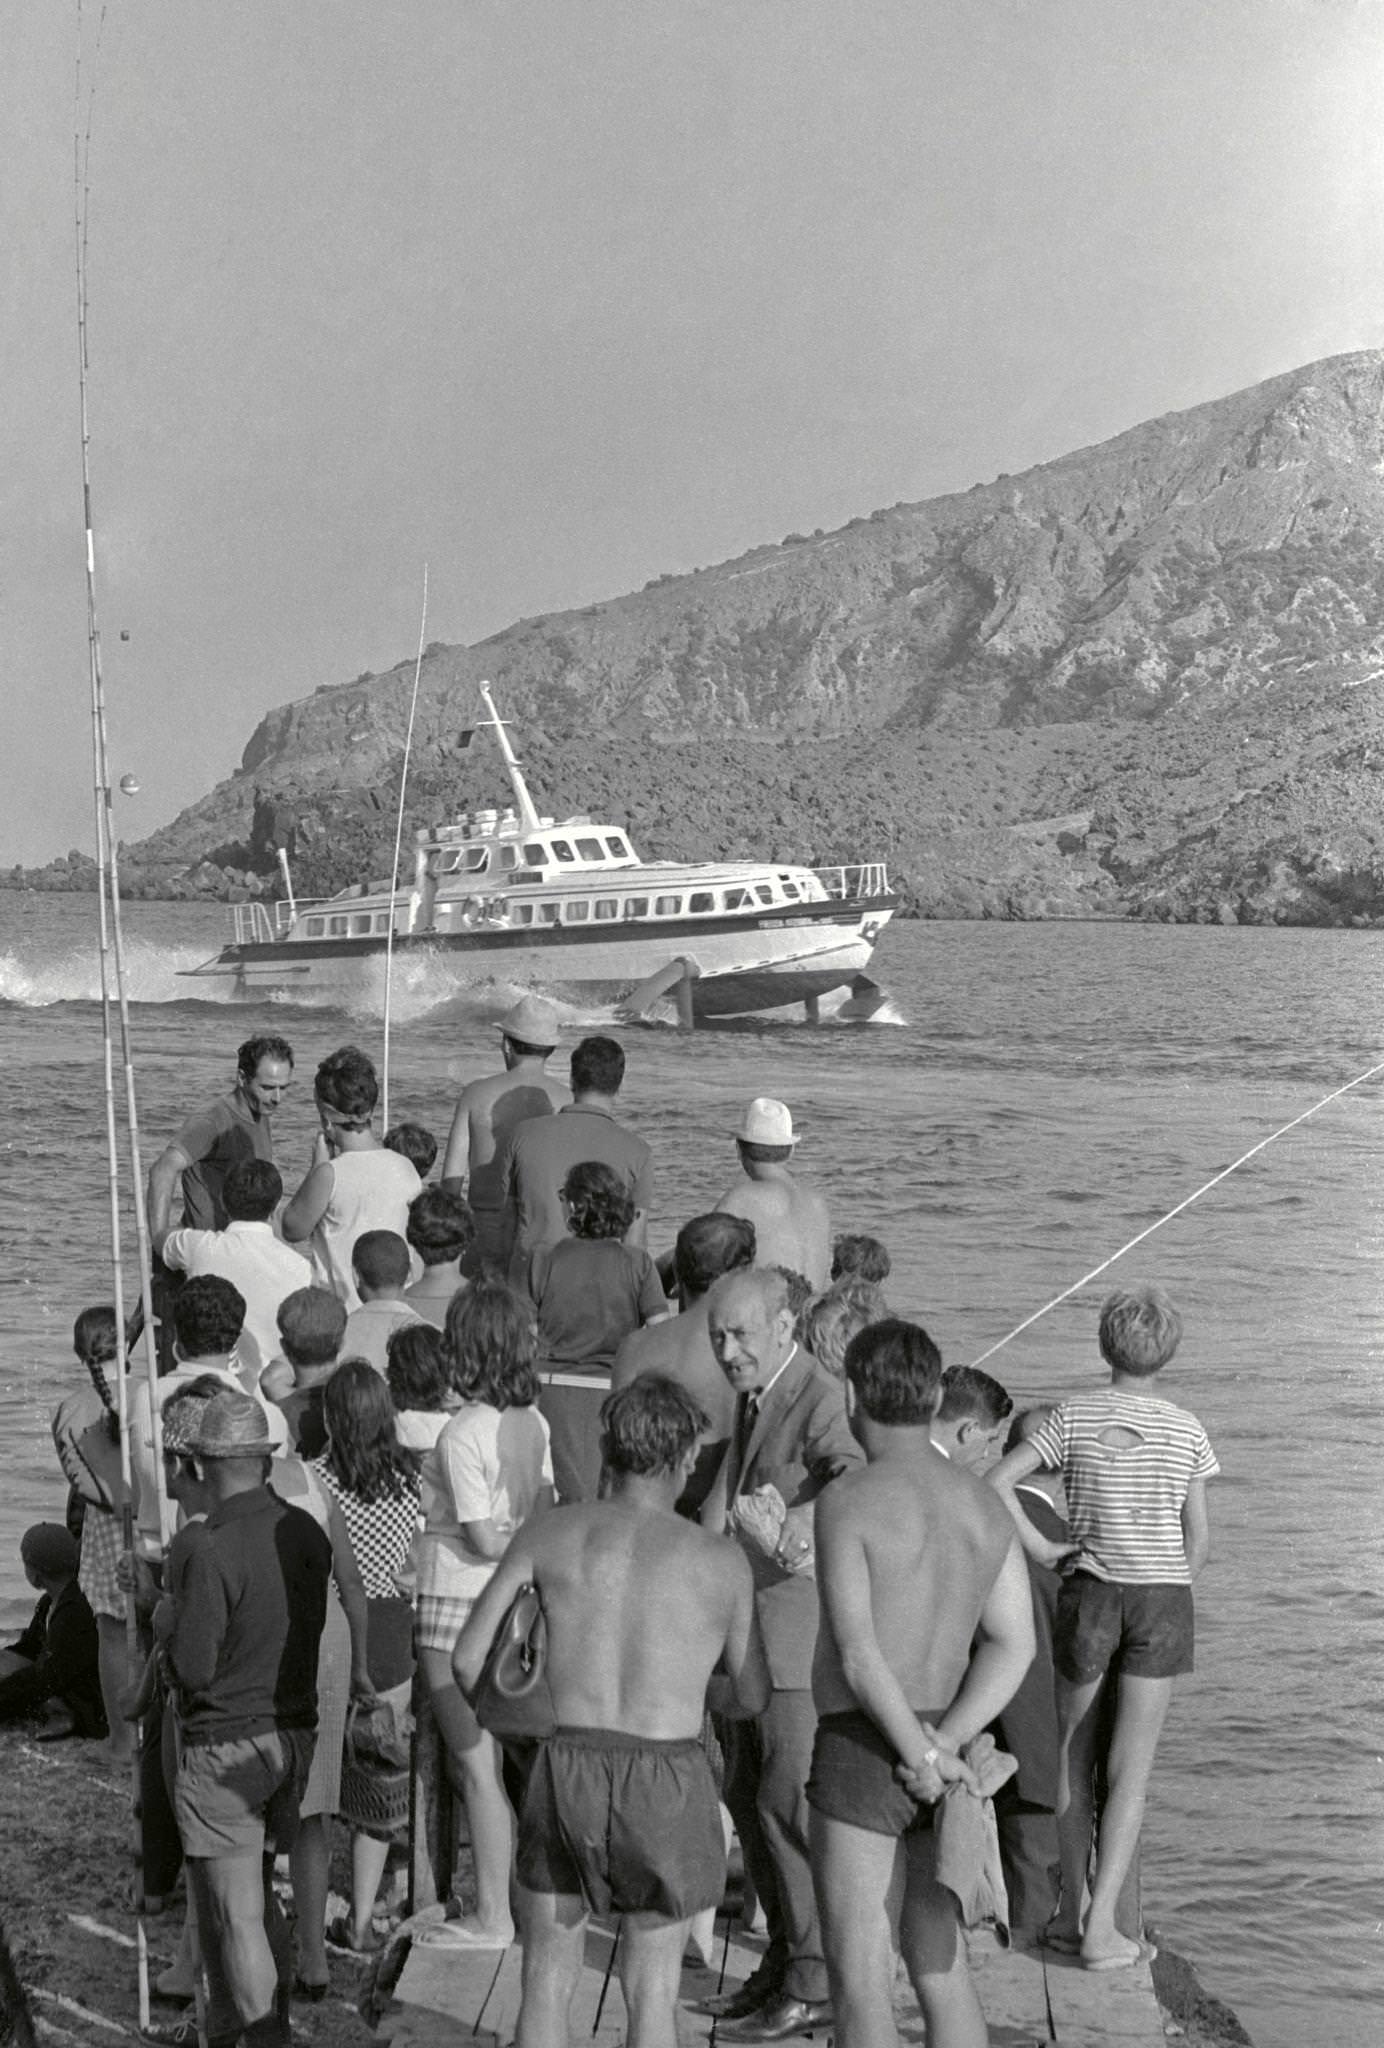 Waiting for the hydrofoil on Vulcano Island, Sicily, June 1970.